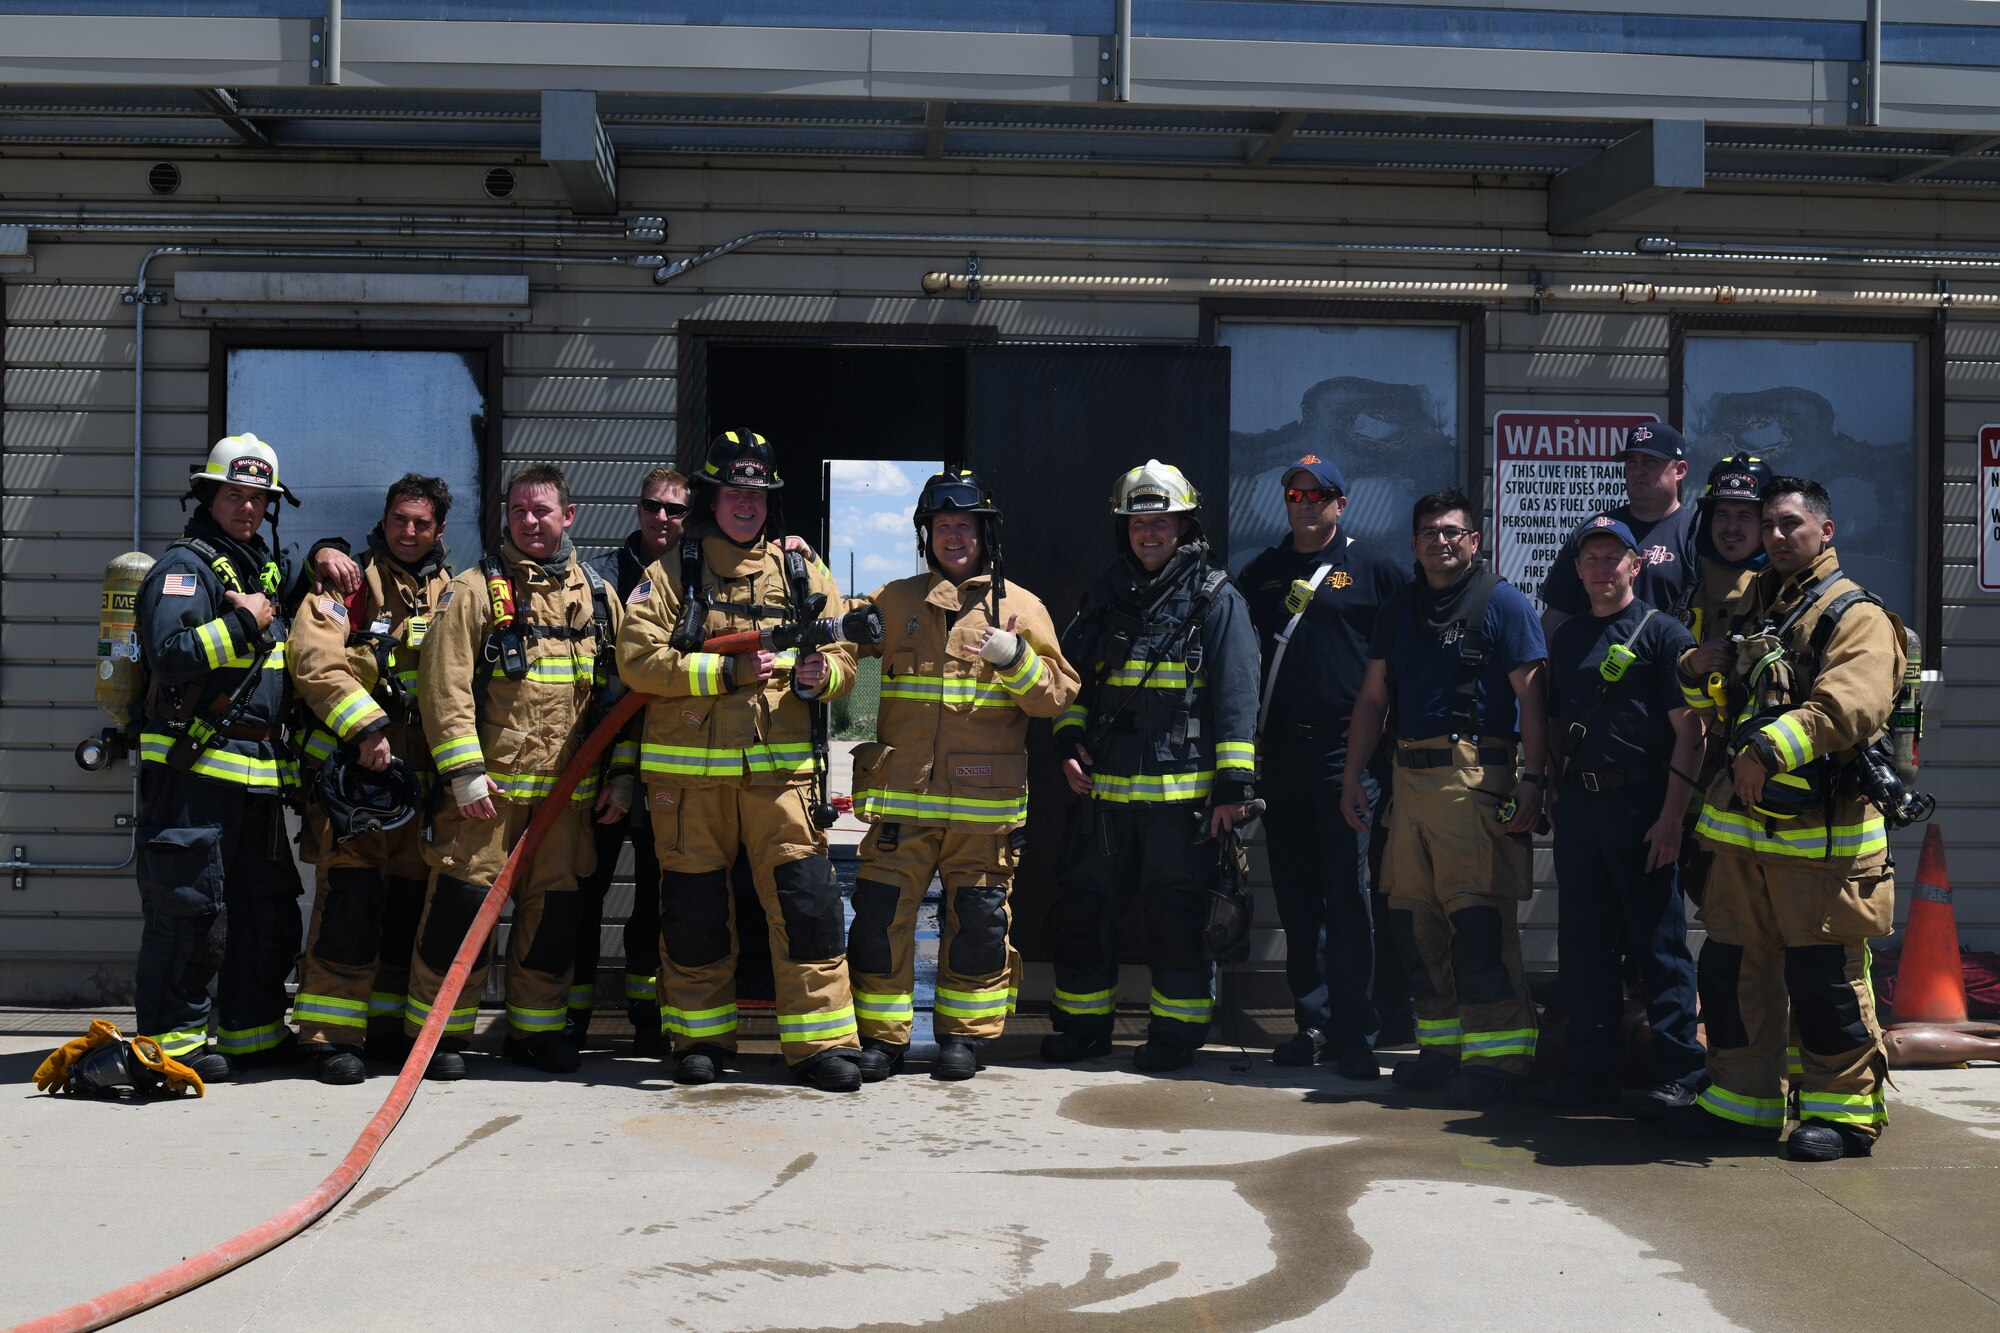 Buckley leadership and the Buckley Fire Department, stand outside the fire exercise facility, May 25, 2021, on Buckley Air Force Base, Colo. The Buckley Fire Department showed Buckley Garrison leadership what their duties may entail with a simulated two-story fire exercise. (U.S. Space Force photo by Senior Airman Michael D. Mathews)